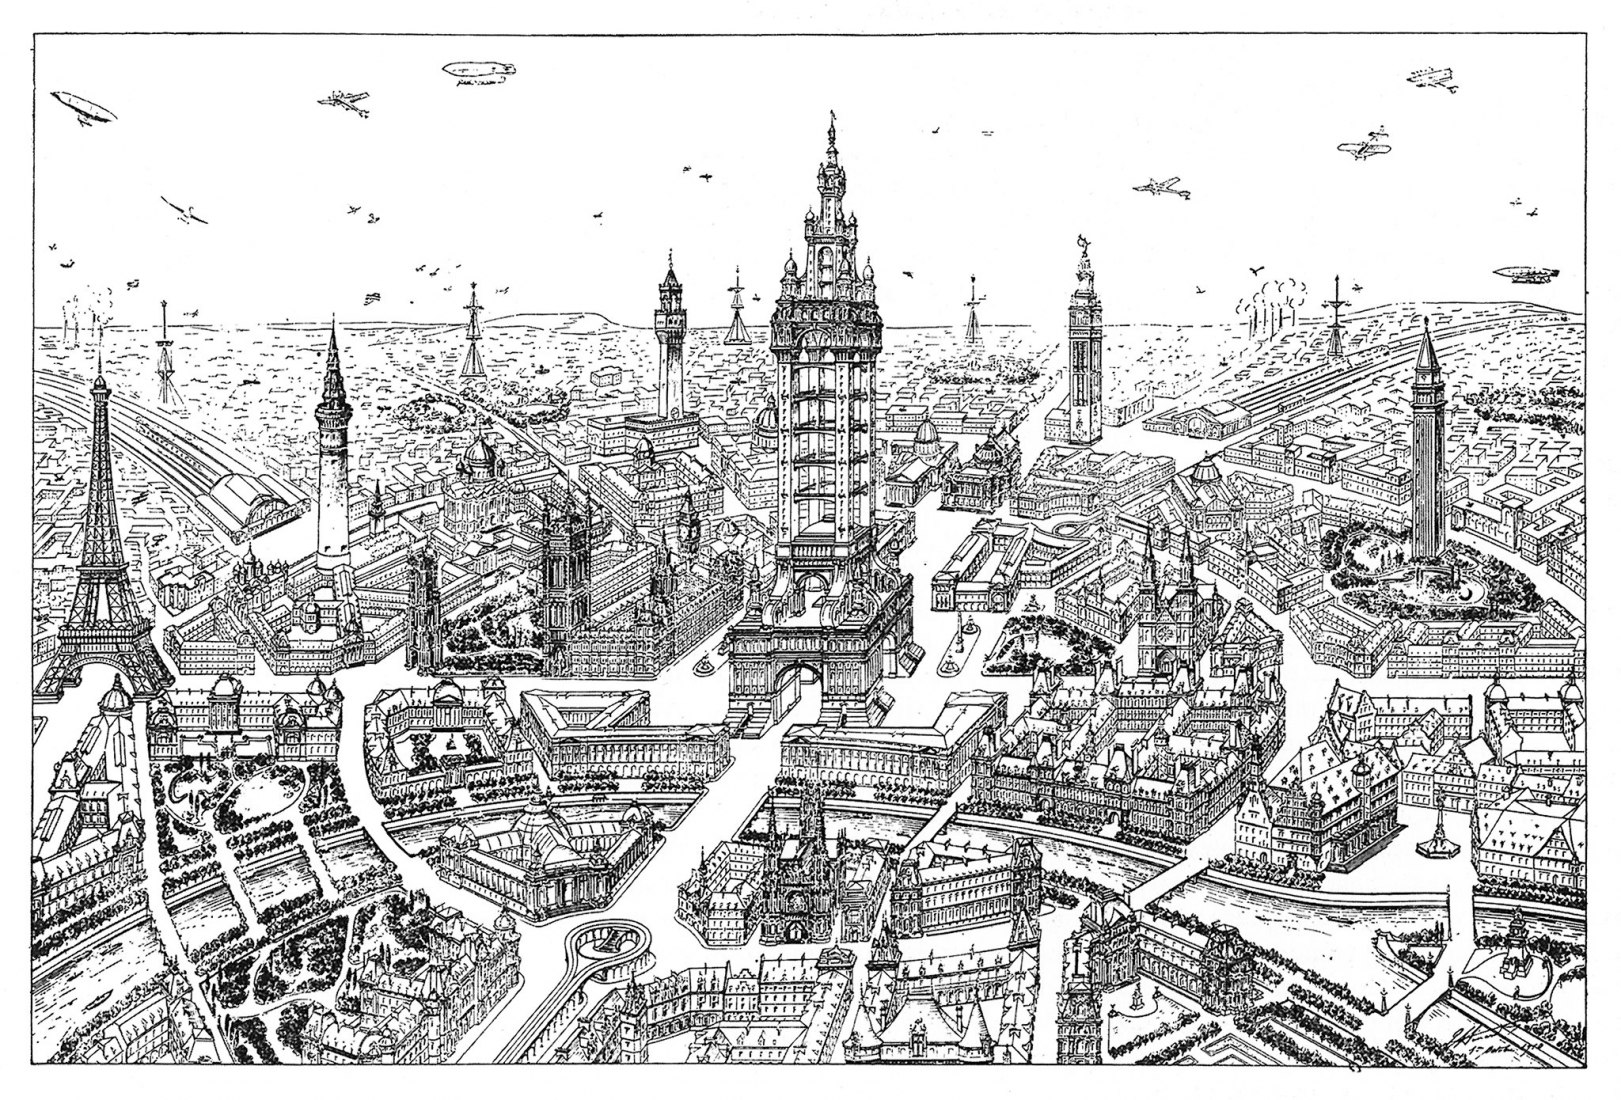 Eugène Hénard. Calle Futura, 1911. A city of the future. View from an airplane